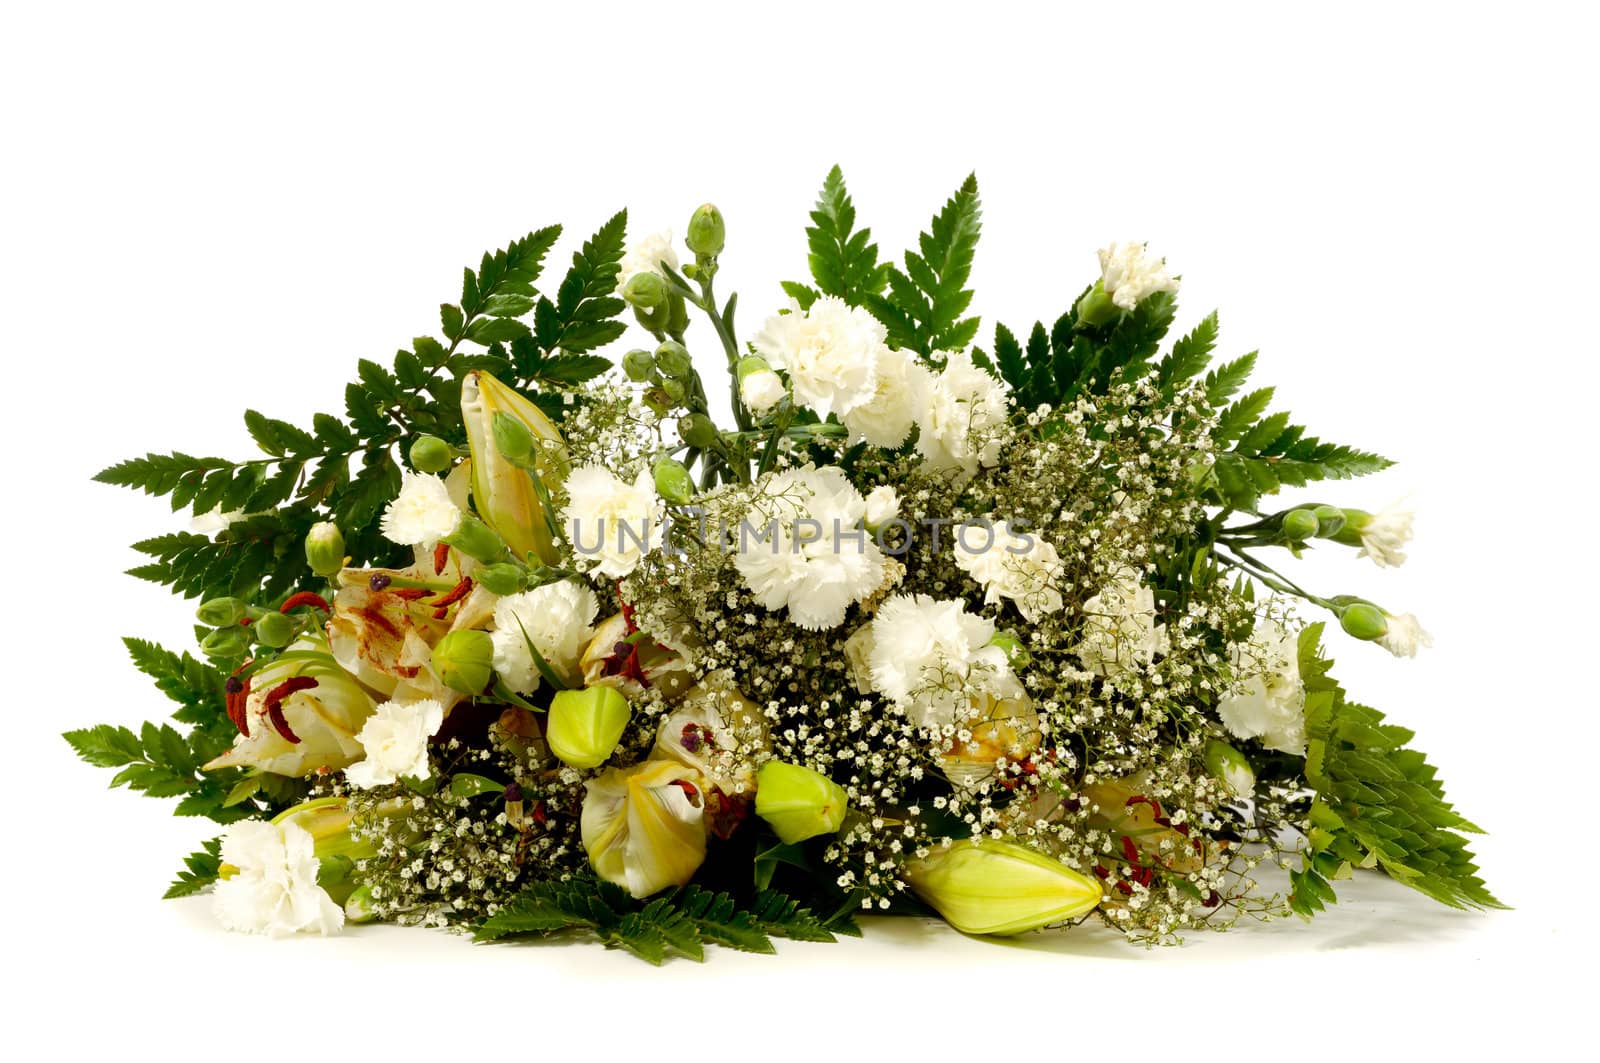 Bouquet of mixed flowers. Taken on a white background.